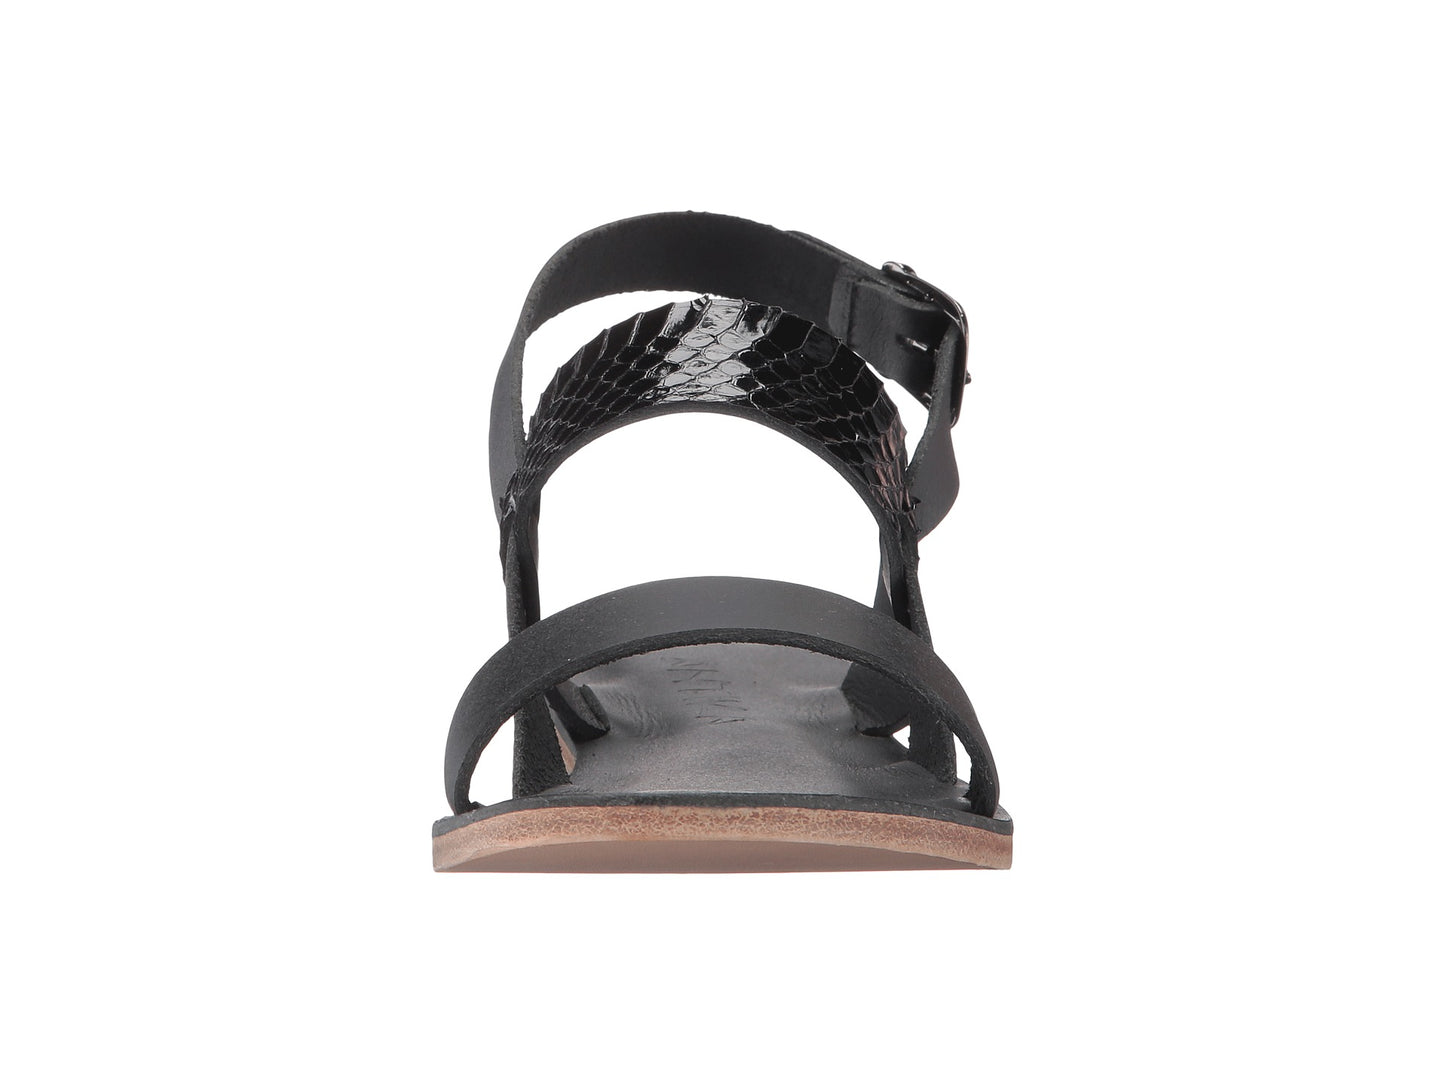 Abbot Kinney Blvd black snake skin, handmade leather buckle sandals with front loop - Front View